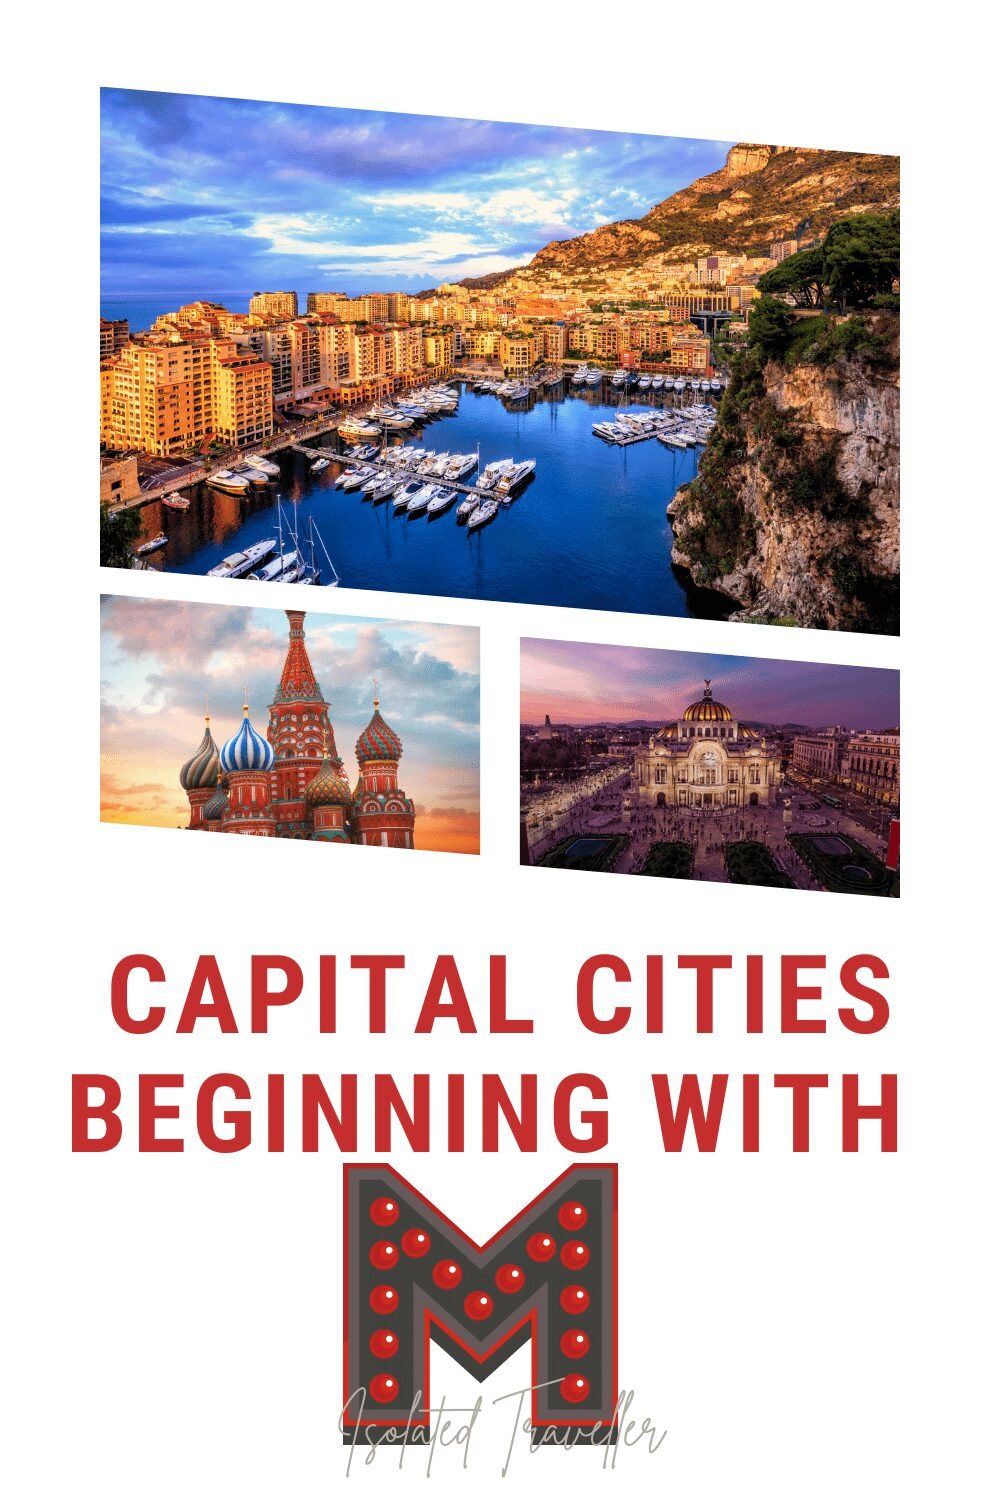 Capital Cities beginning with M